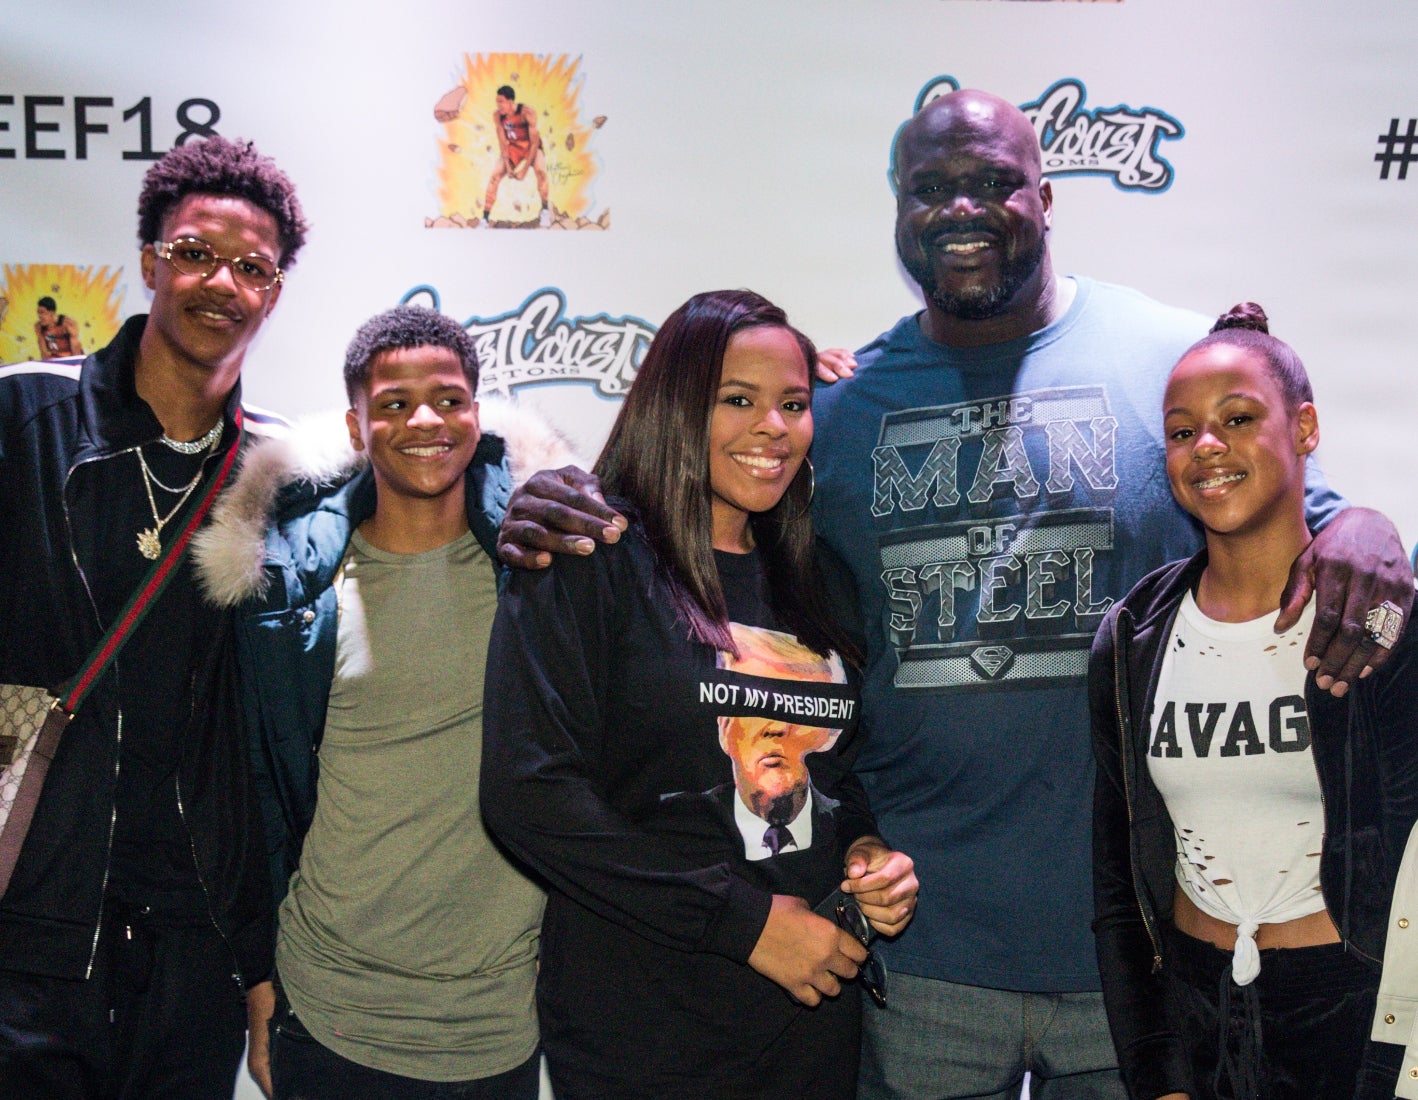 Shaquille O'Neal, an NBA legend, is a loving father of sιx children